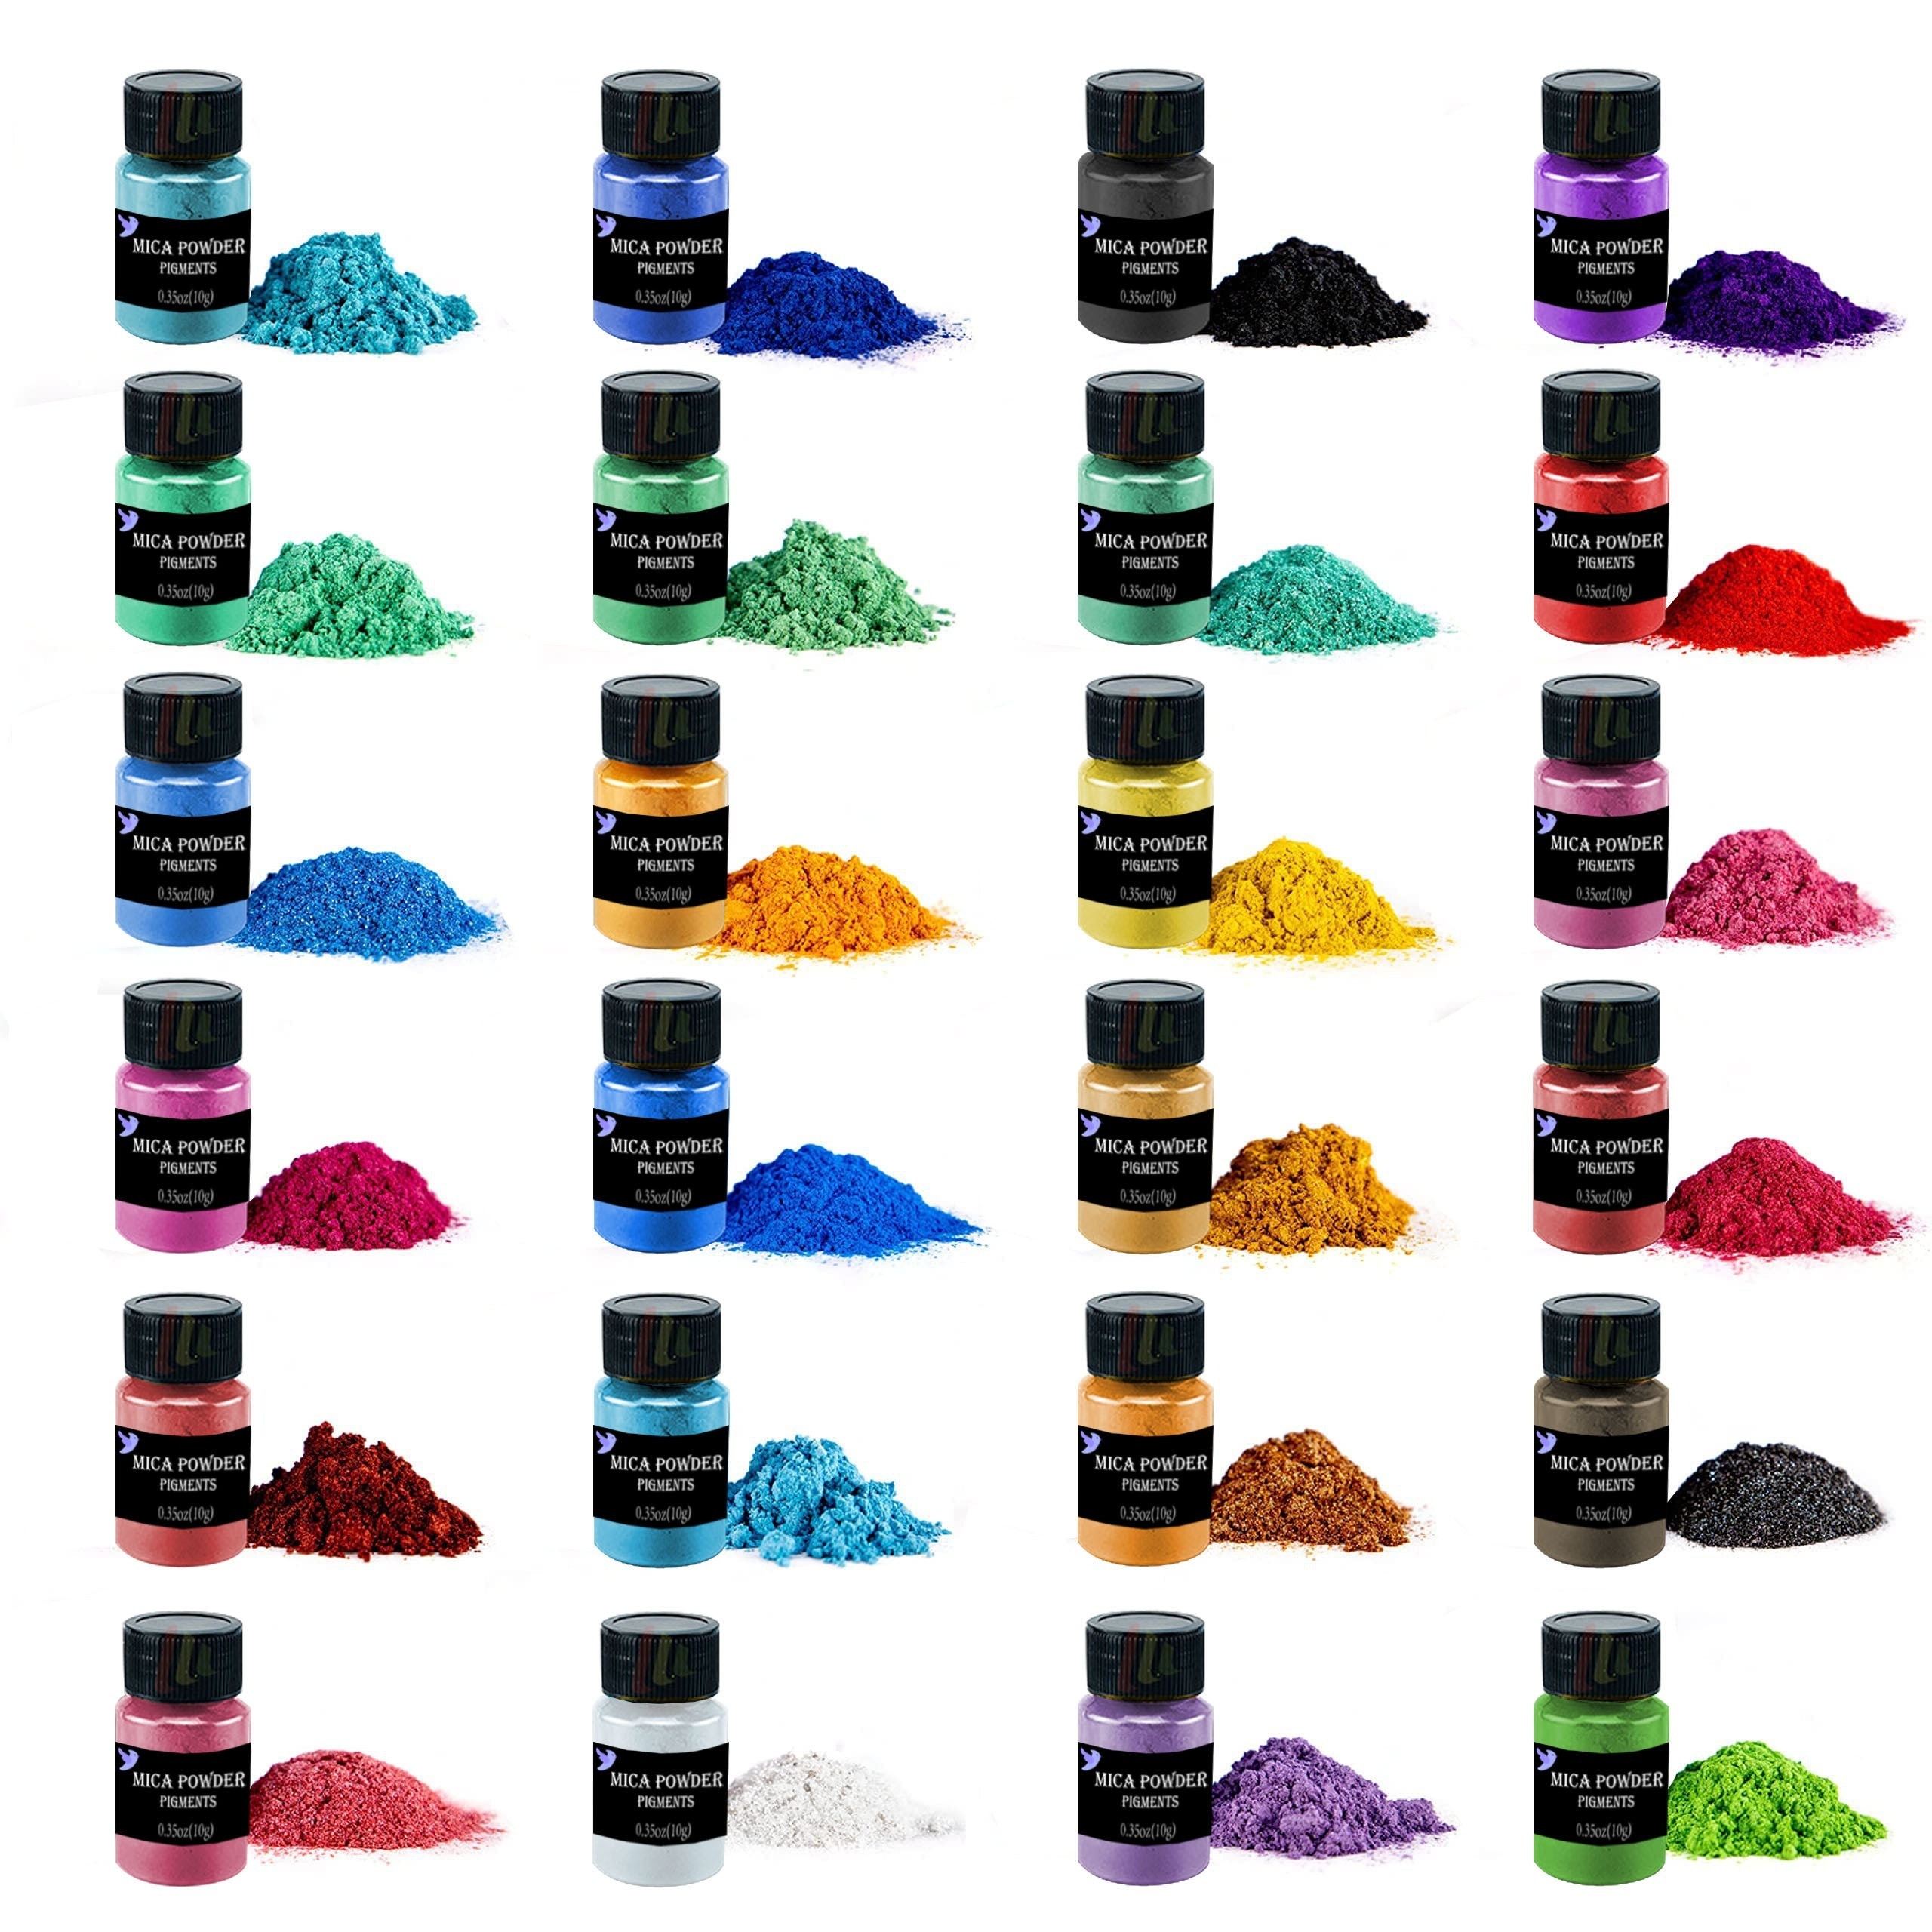 

10g, 24 Jars Mica Powder Pearlescent Pigment - Resin Epoxy Art Kit - Making, Candle Jars Colorful Jewelry Making Supplies